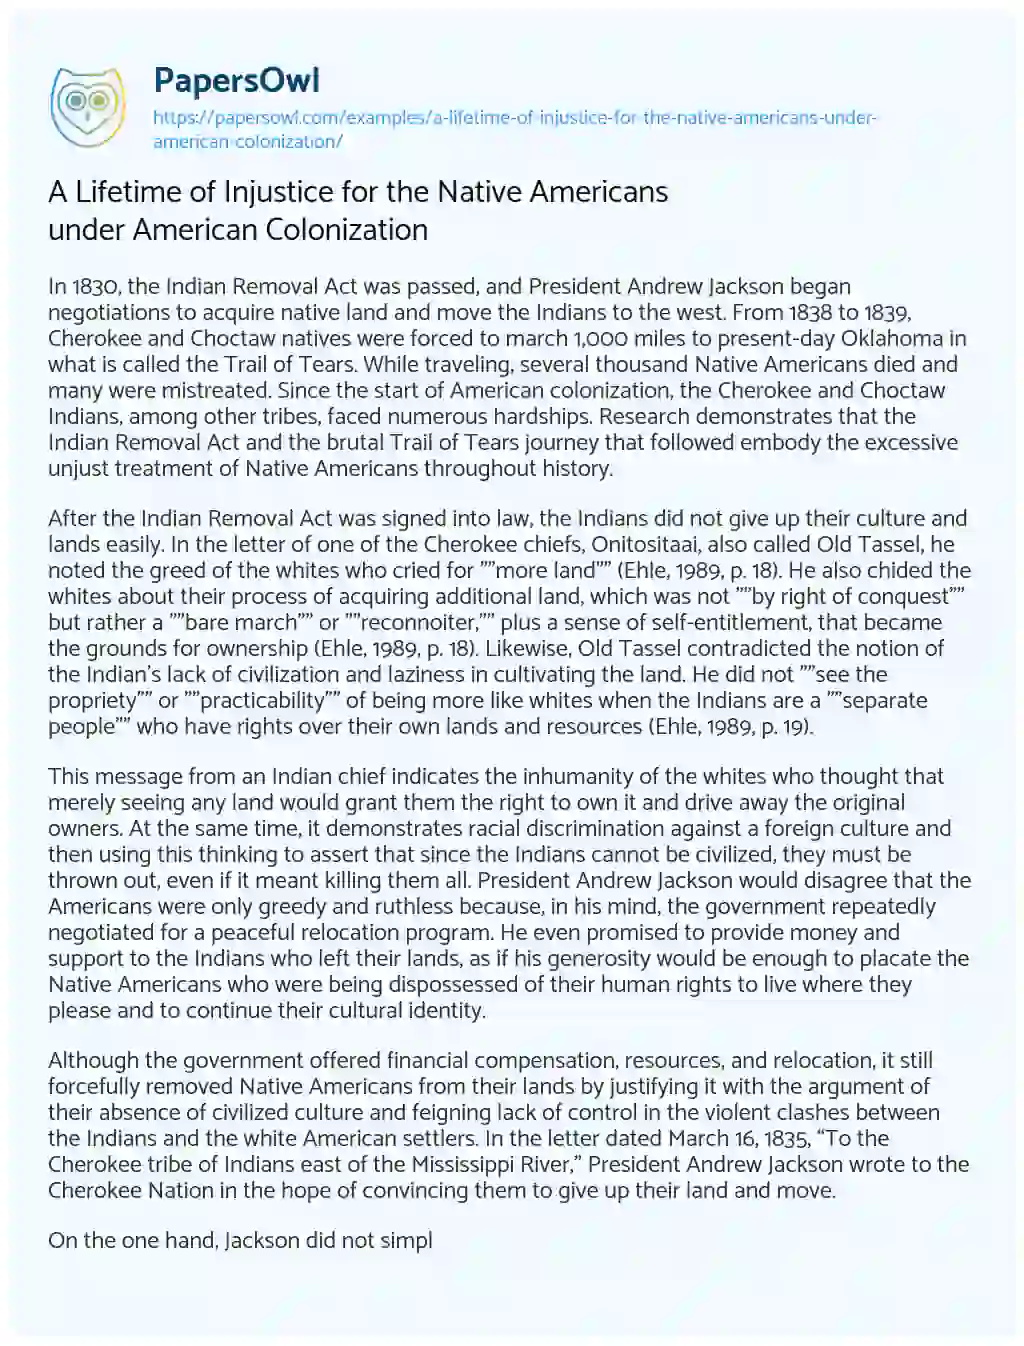 Essay on A Lifetime of Injustice for the Native Americans under American Colonization